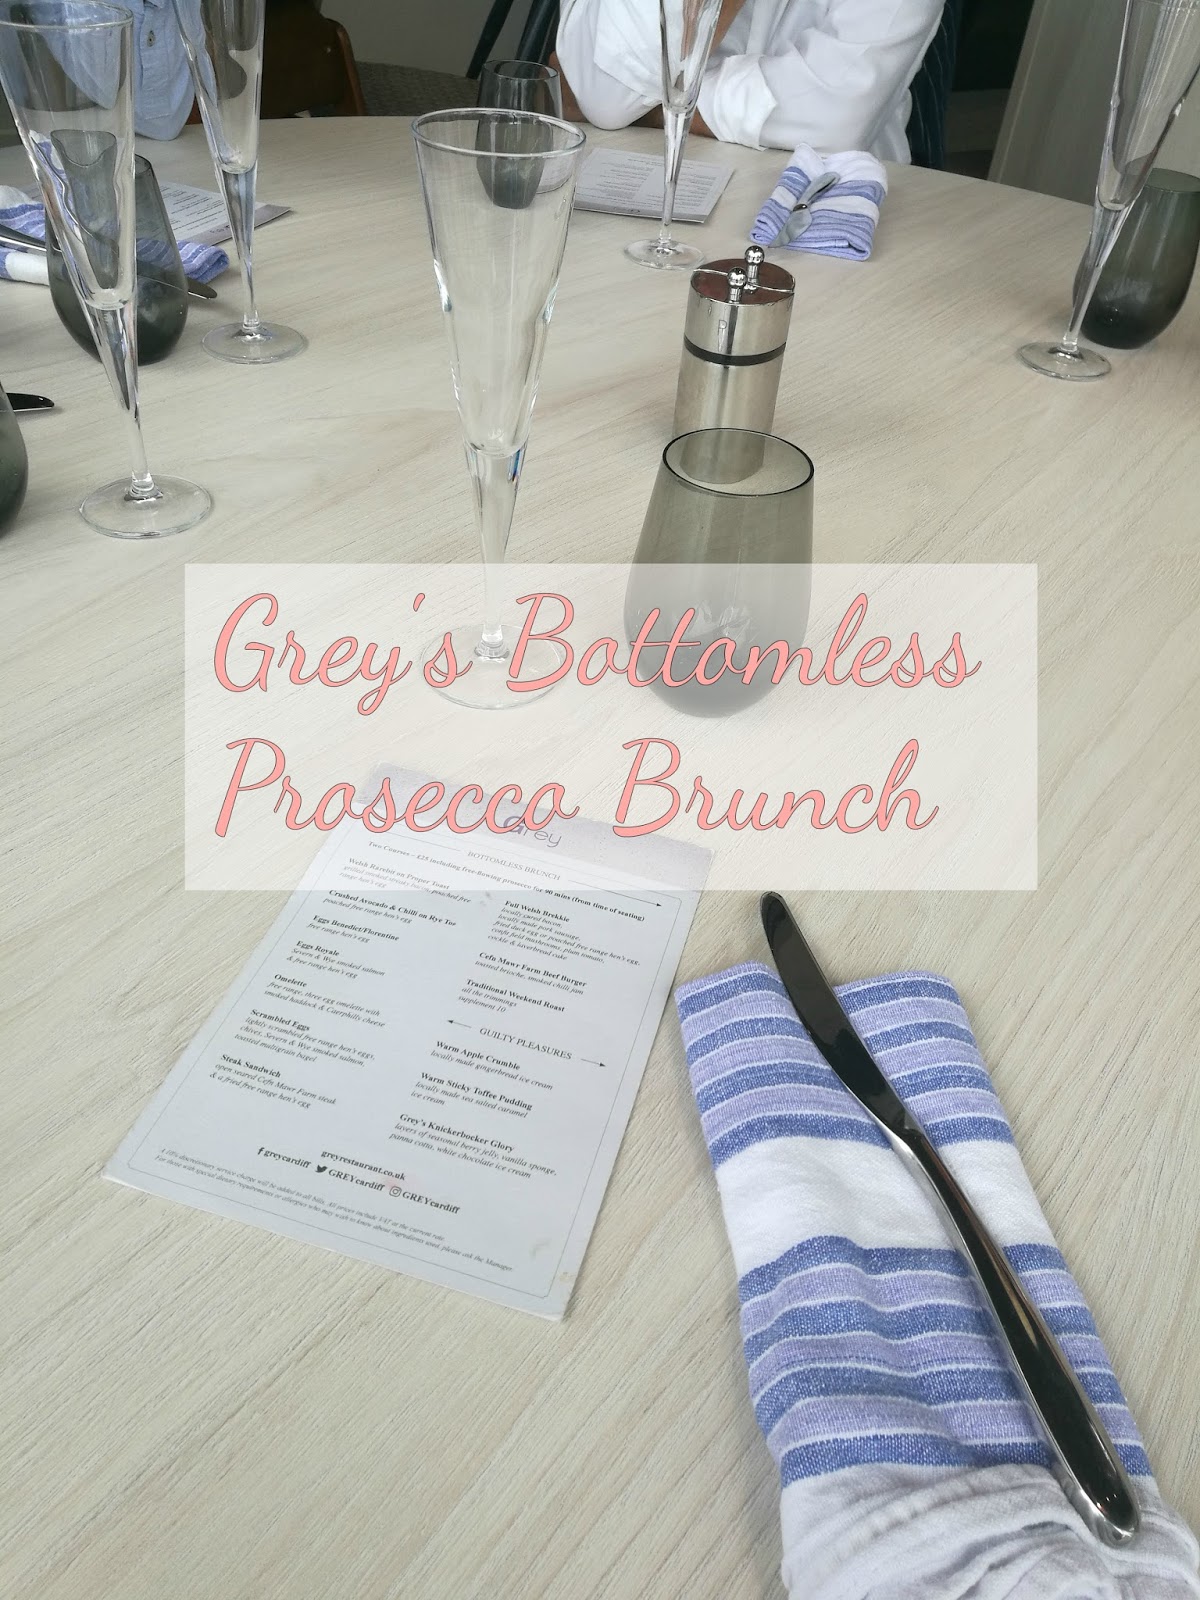 Best Bottomless Prosecco Brunch in Cardiff